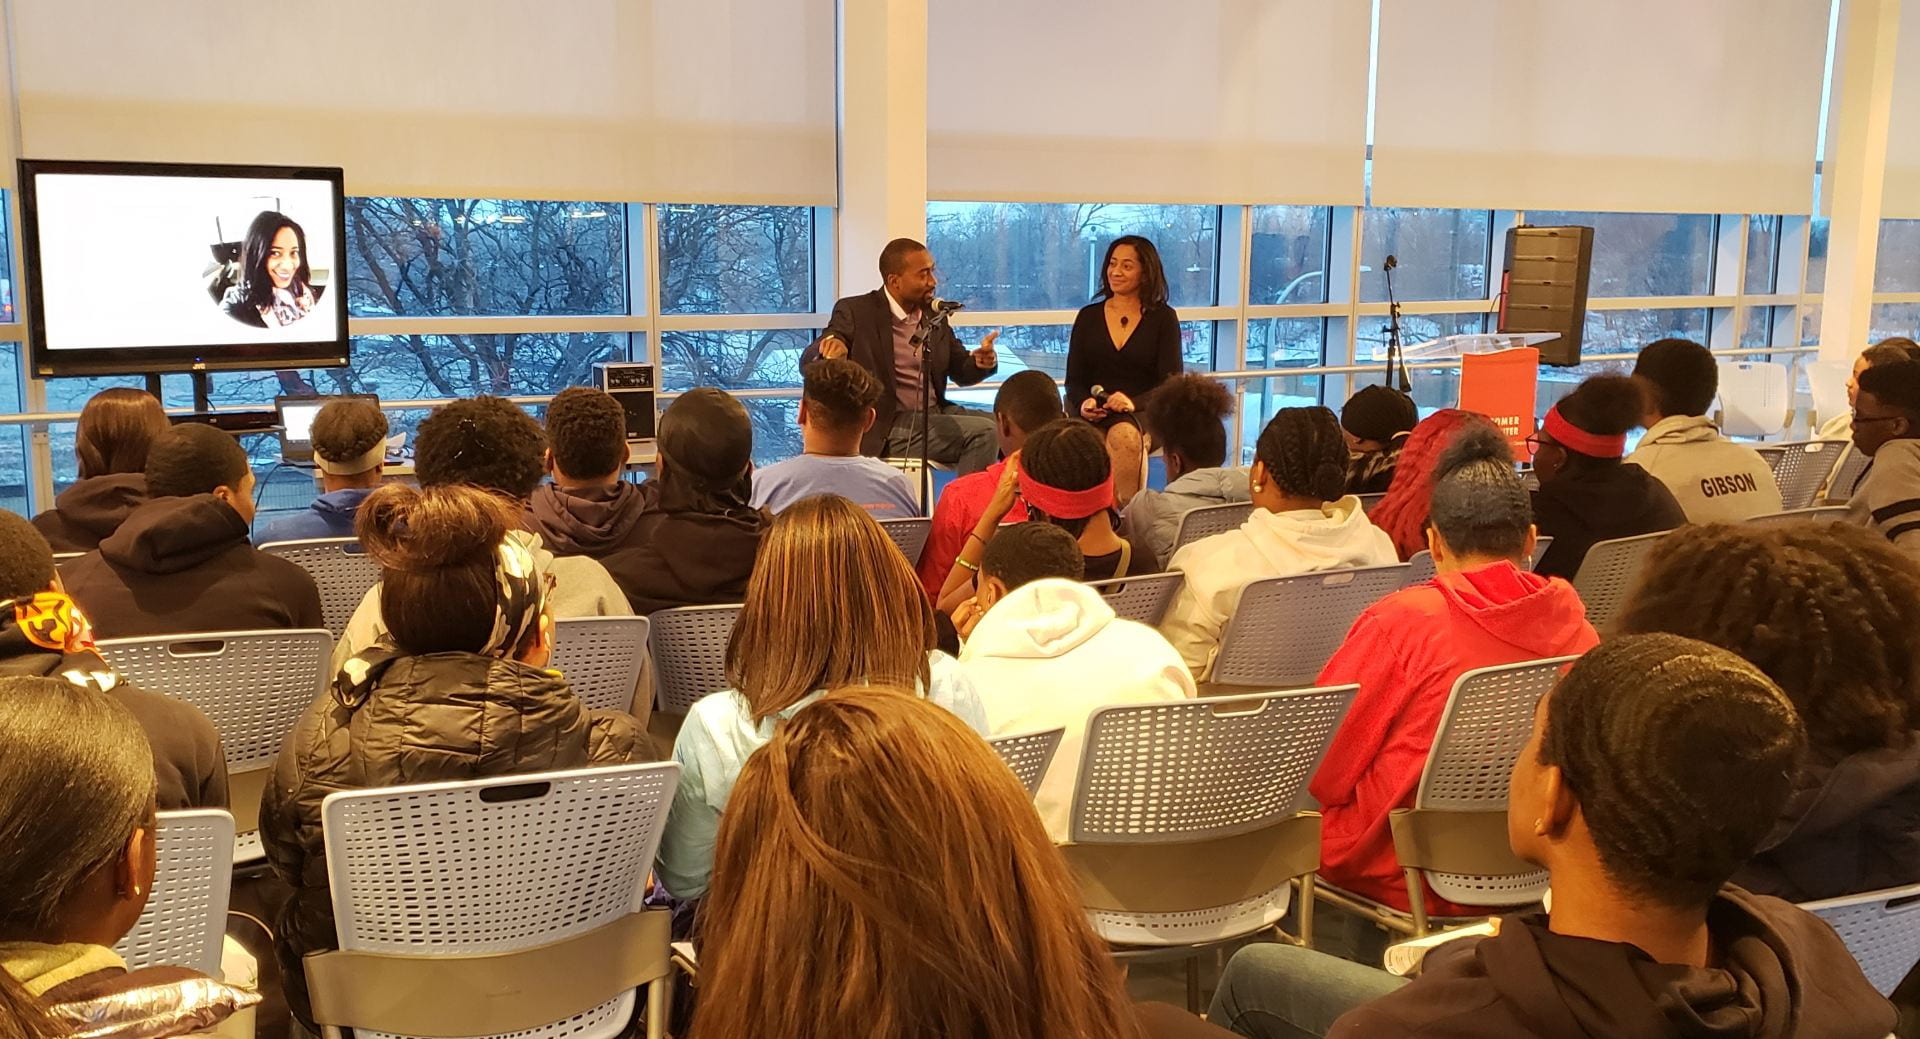 JinJa Birkenbeuel, who serves on the advisory board of the Coleman Entrepreneurship Center, leads a discussion on entrepreneurial thinking with Linal Harris (left), founder and principal coach at Insights 4 Life Coaching, LLC.